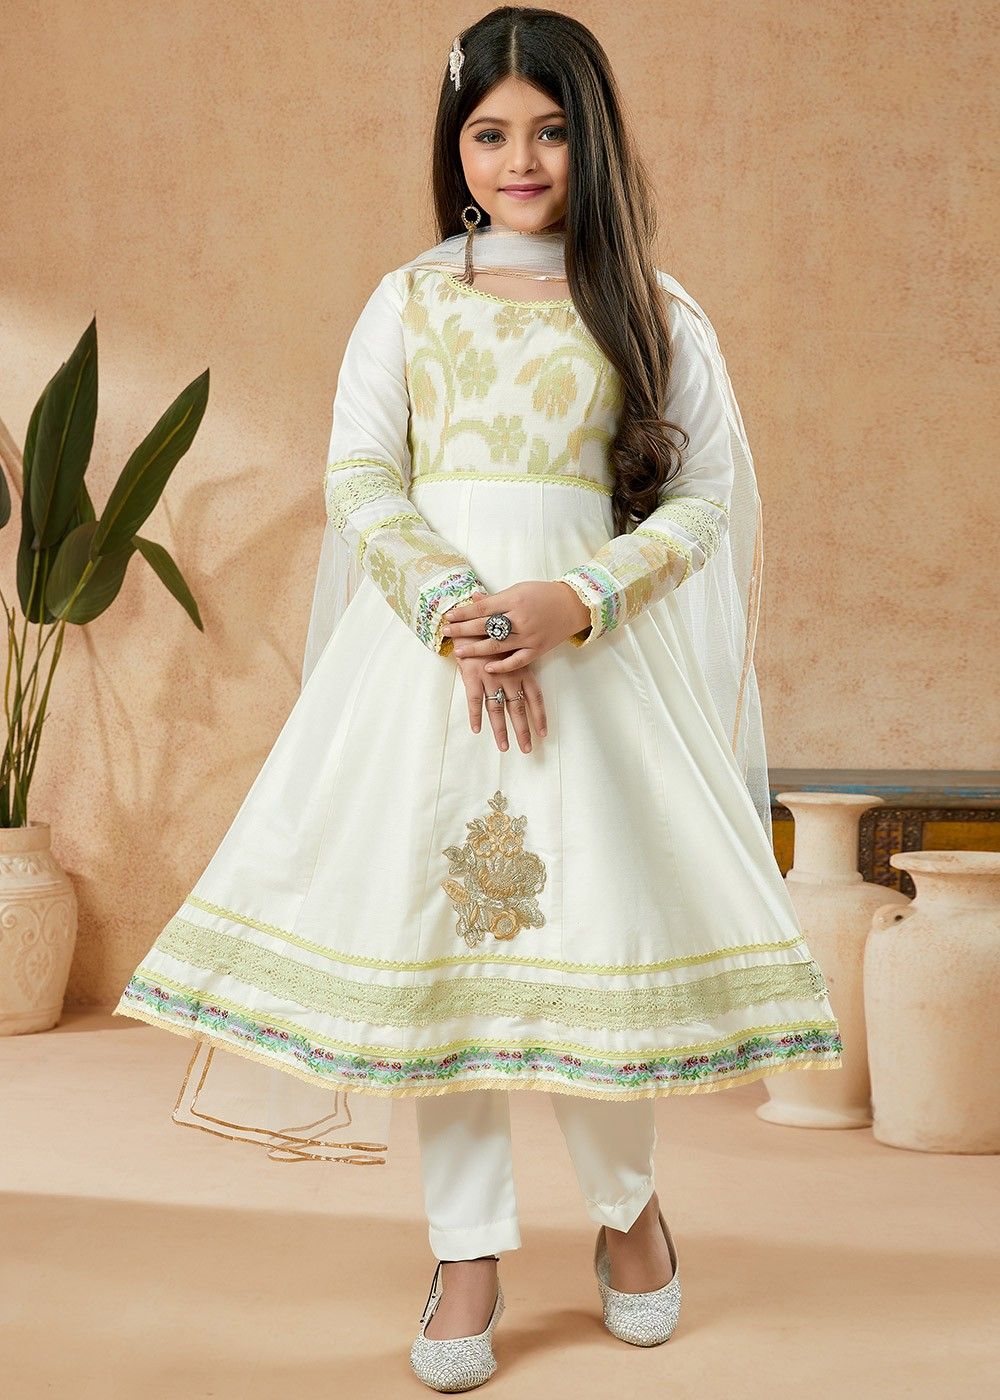 Off White Cotton Embroidered Churidar Suit